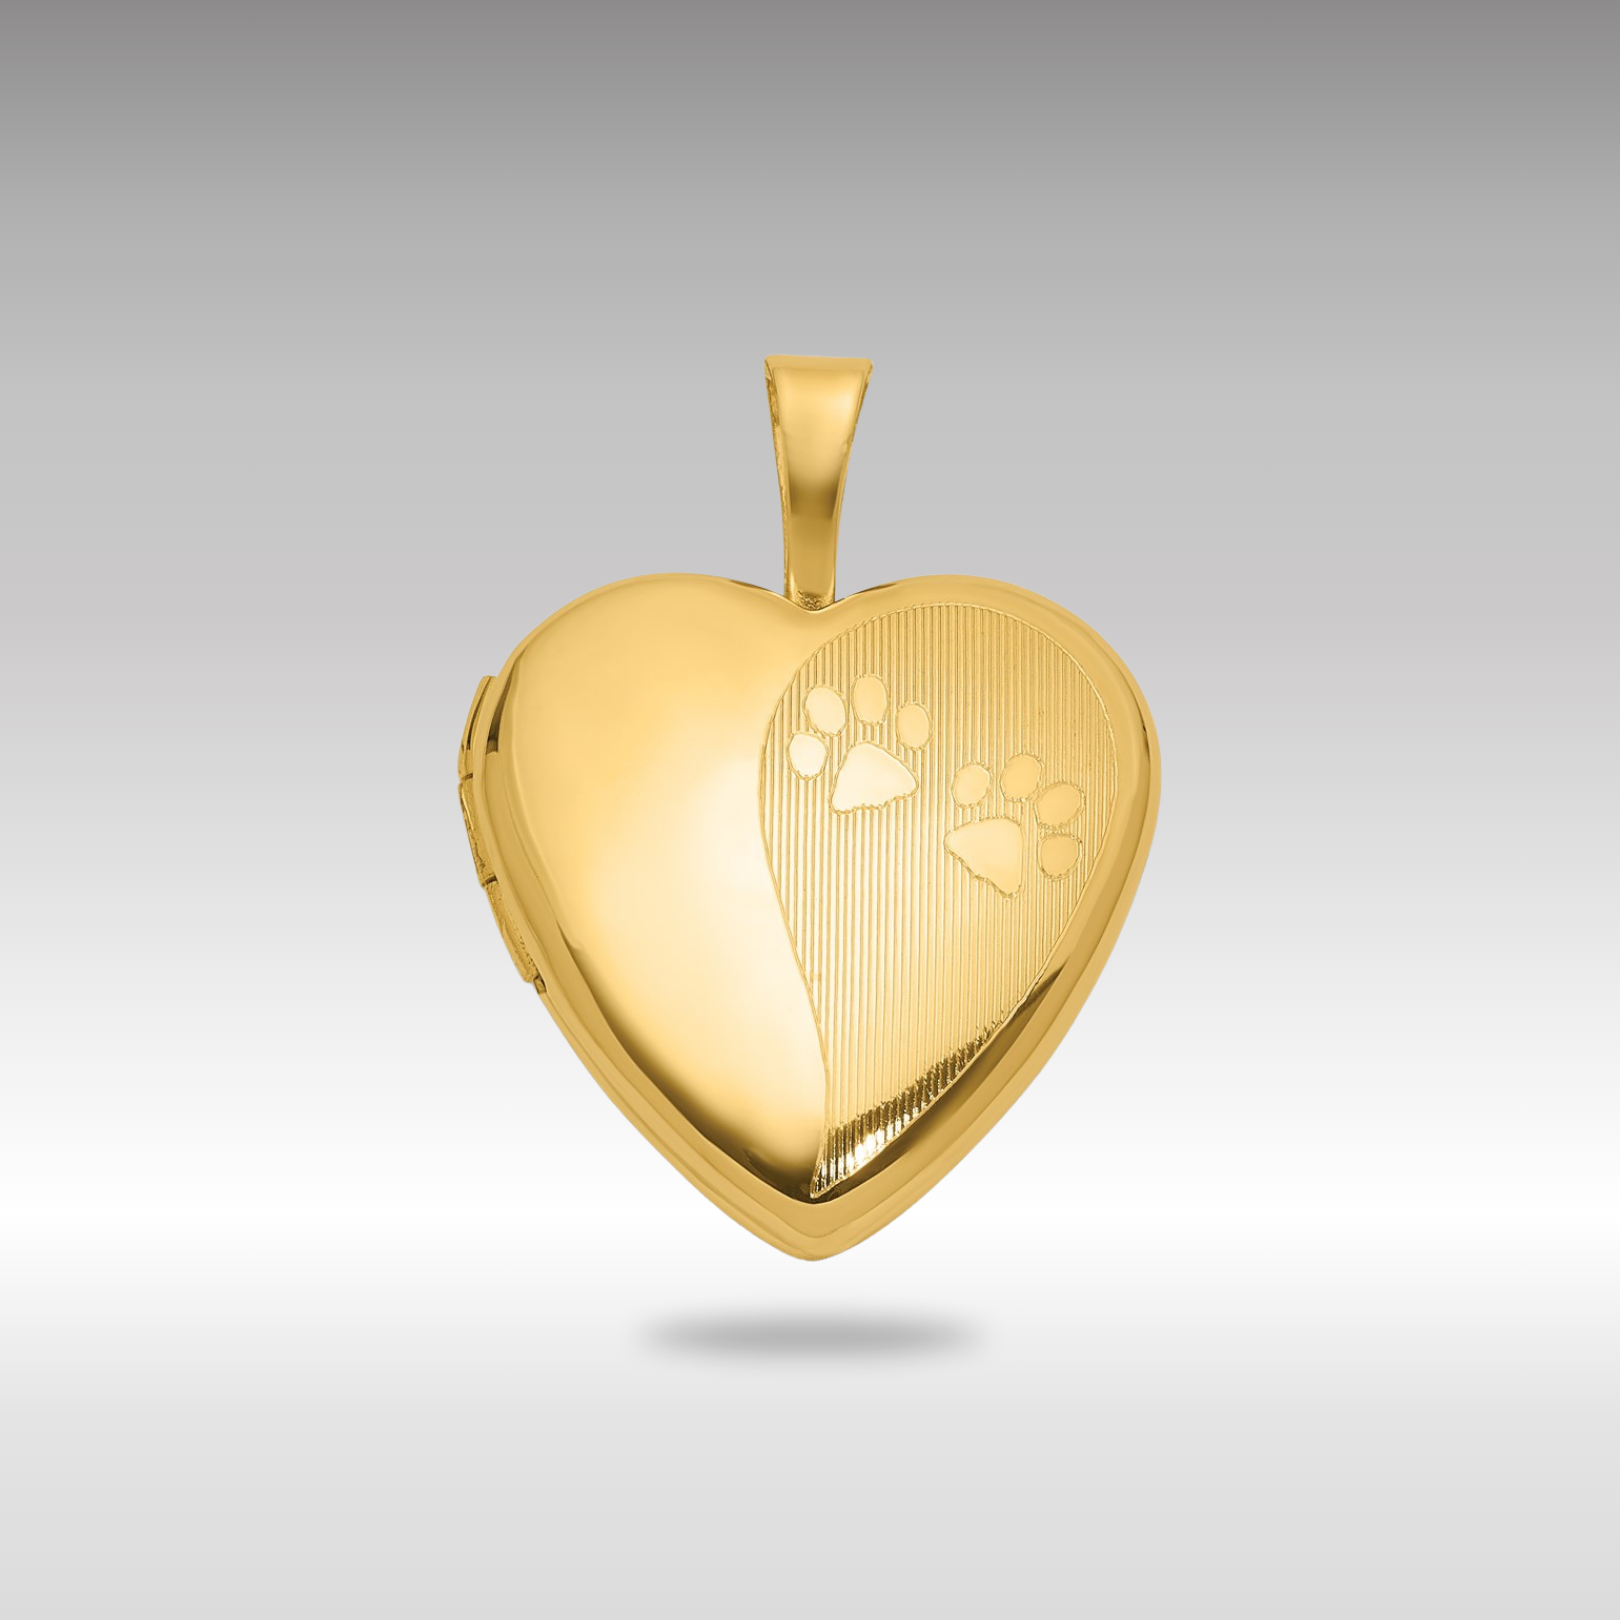 Gold Paw Print Heart Locket Necklace - Charlie & Co. Jewelry